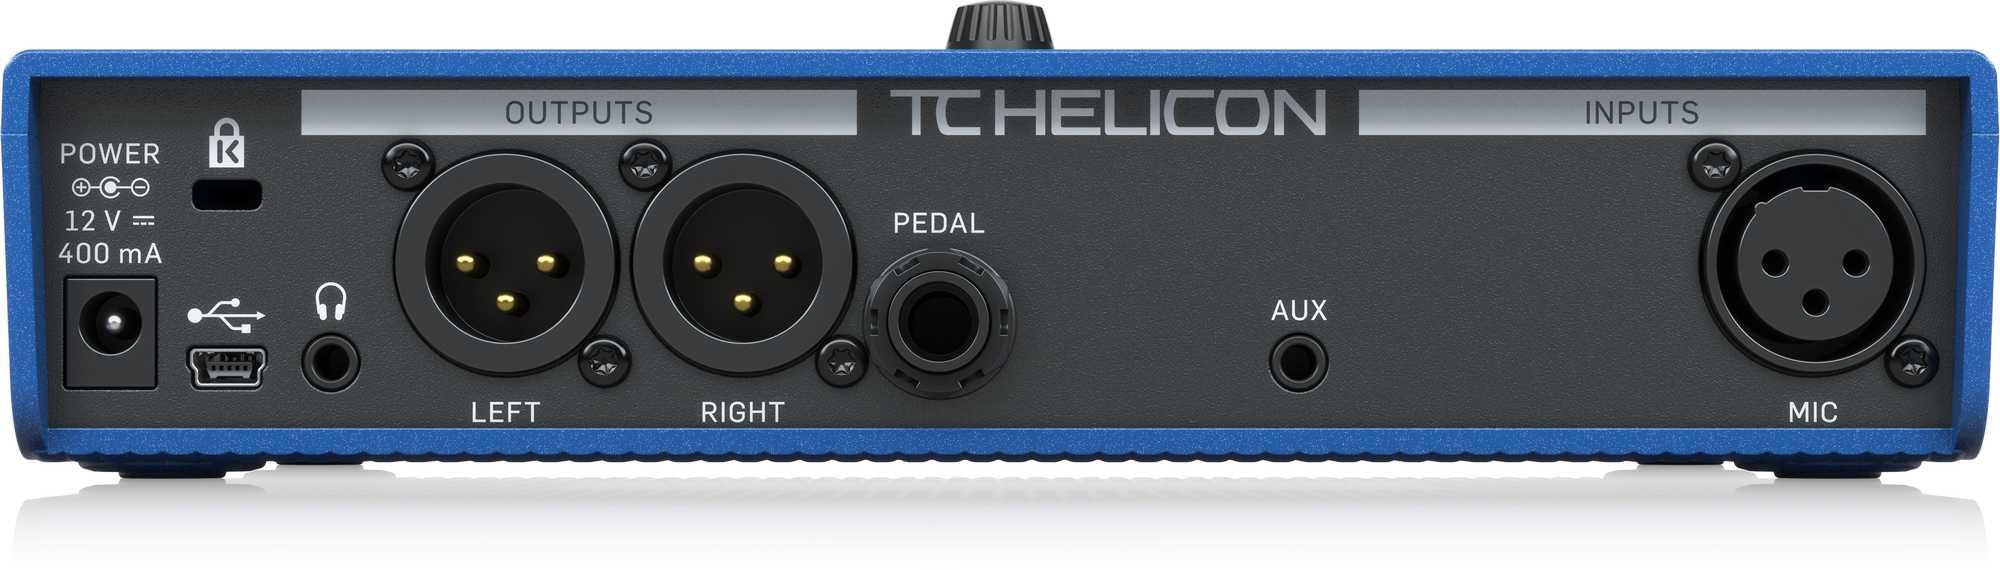 VOICELIVE PLAY TC helicon 【歌枠配信者必見】 - エフェクター